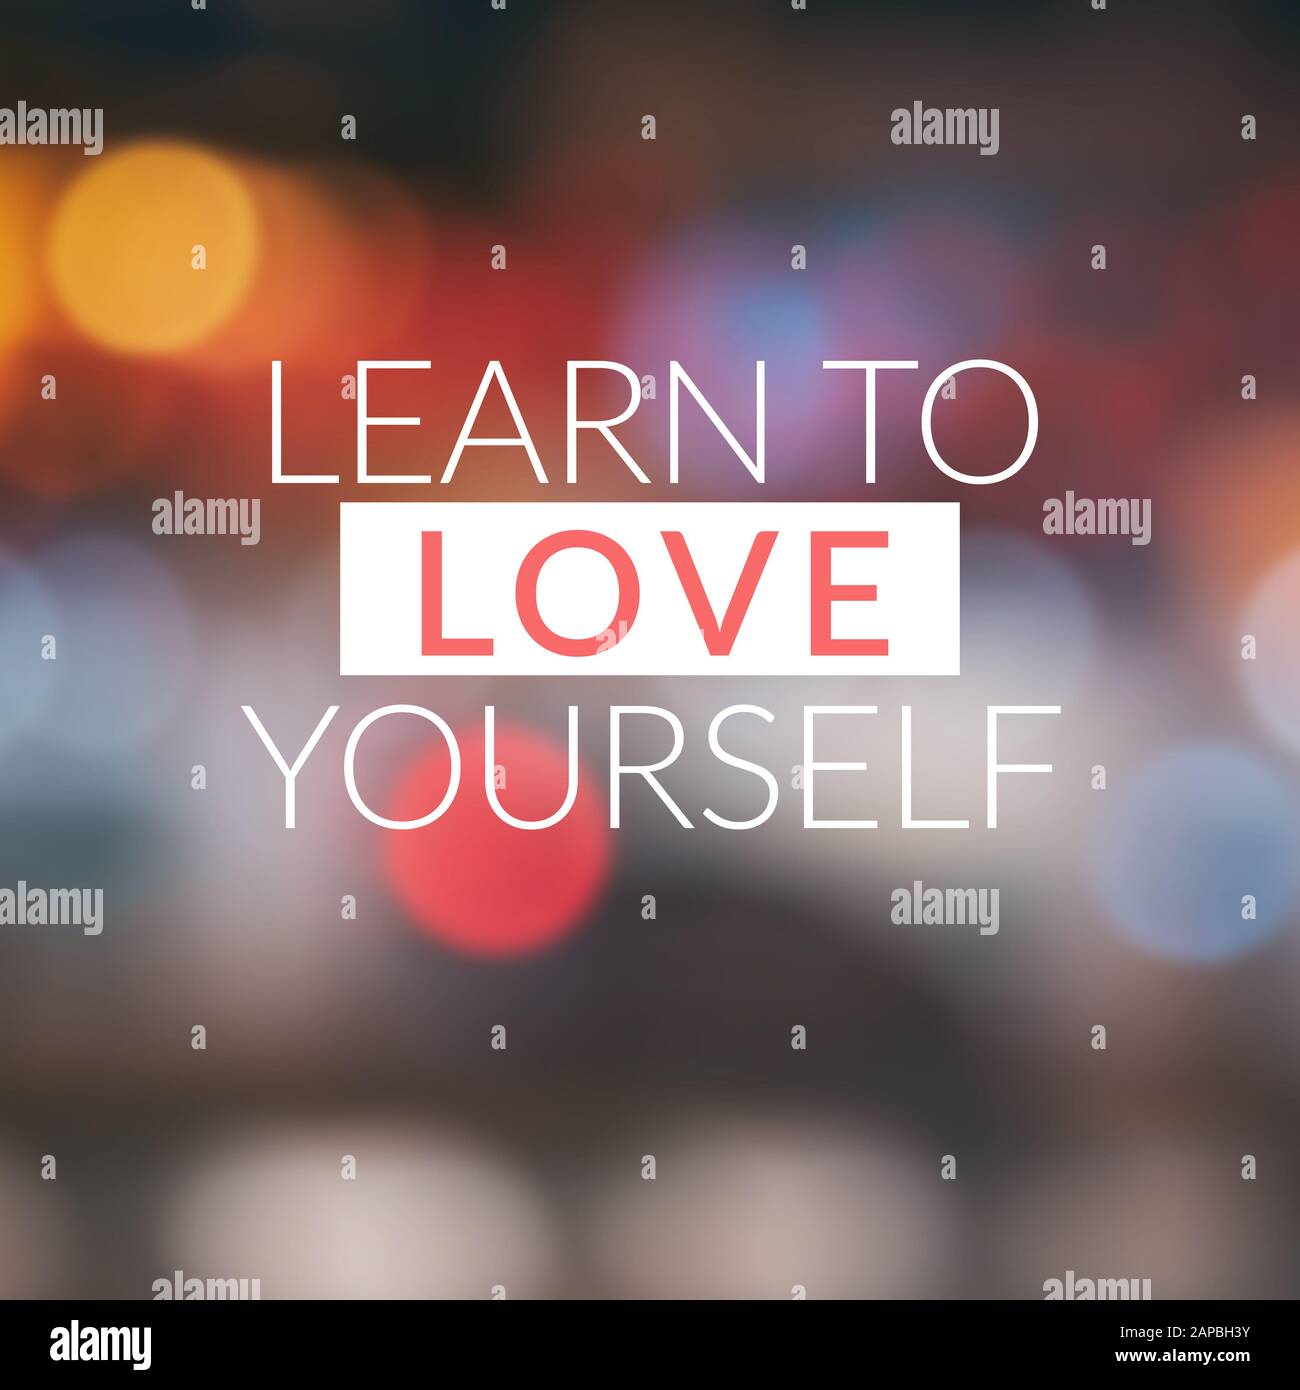 Motivational and Life Inspirational Quotes - Learn to love yourself. Stock Photo